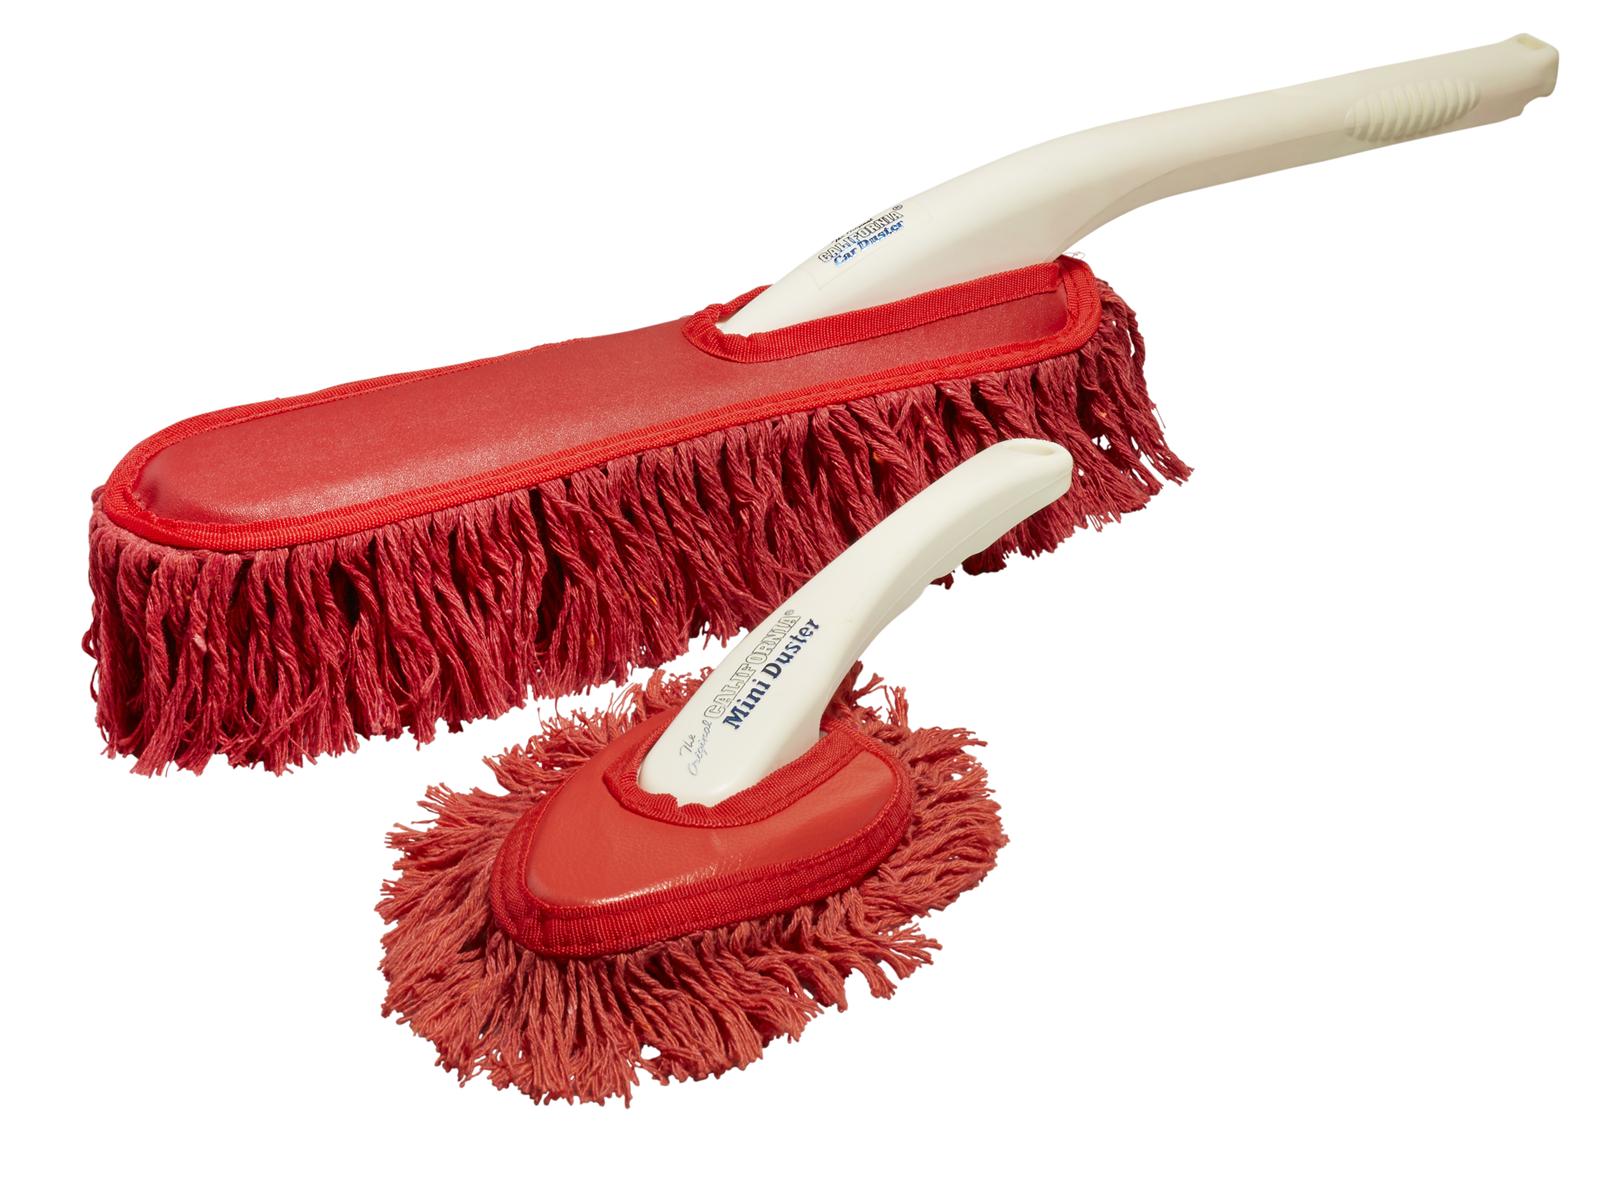 California Car Duster Standard Car Duster With Plastic Handle, Red 25  (62443)